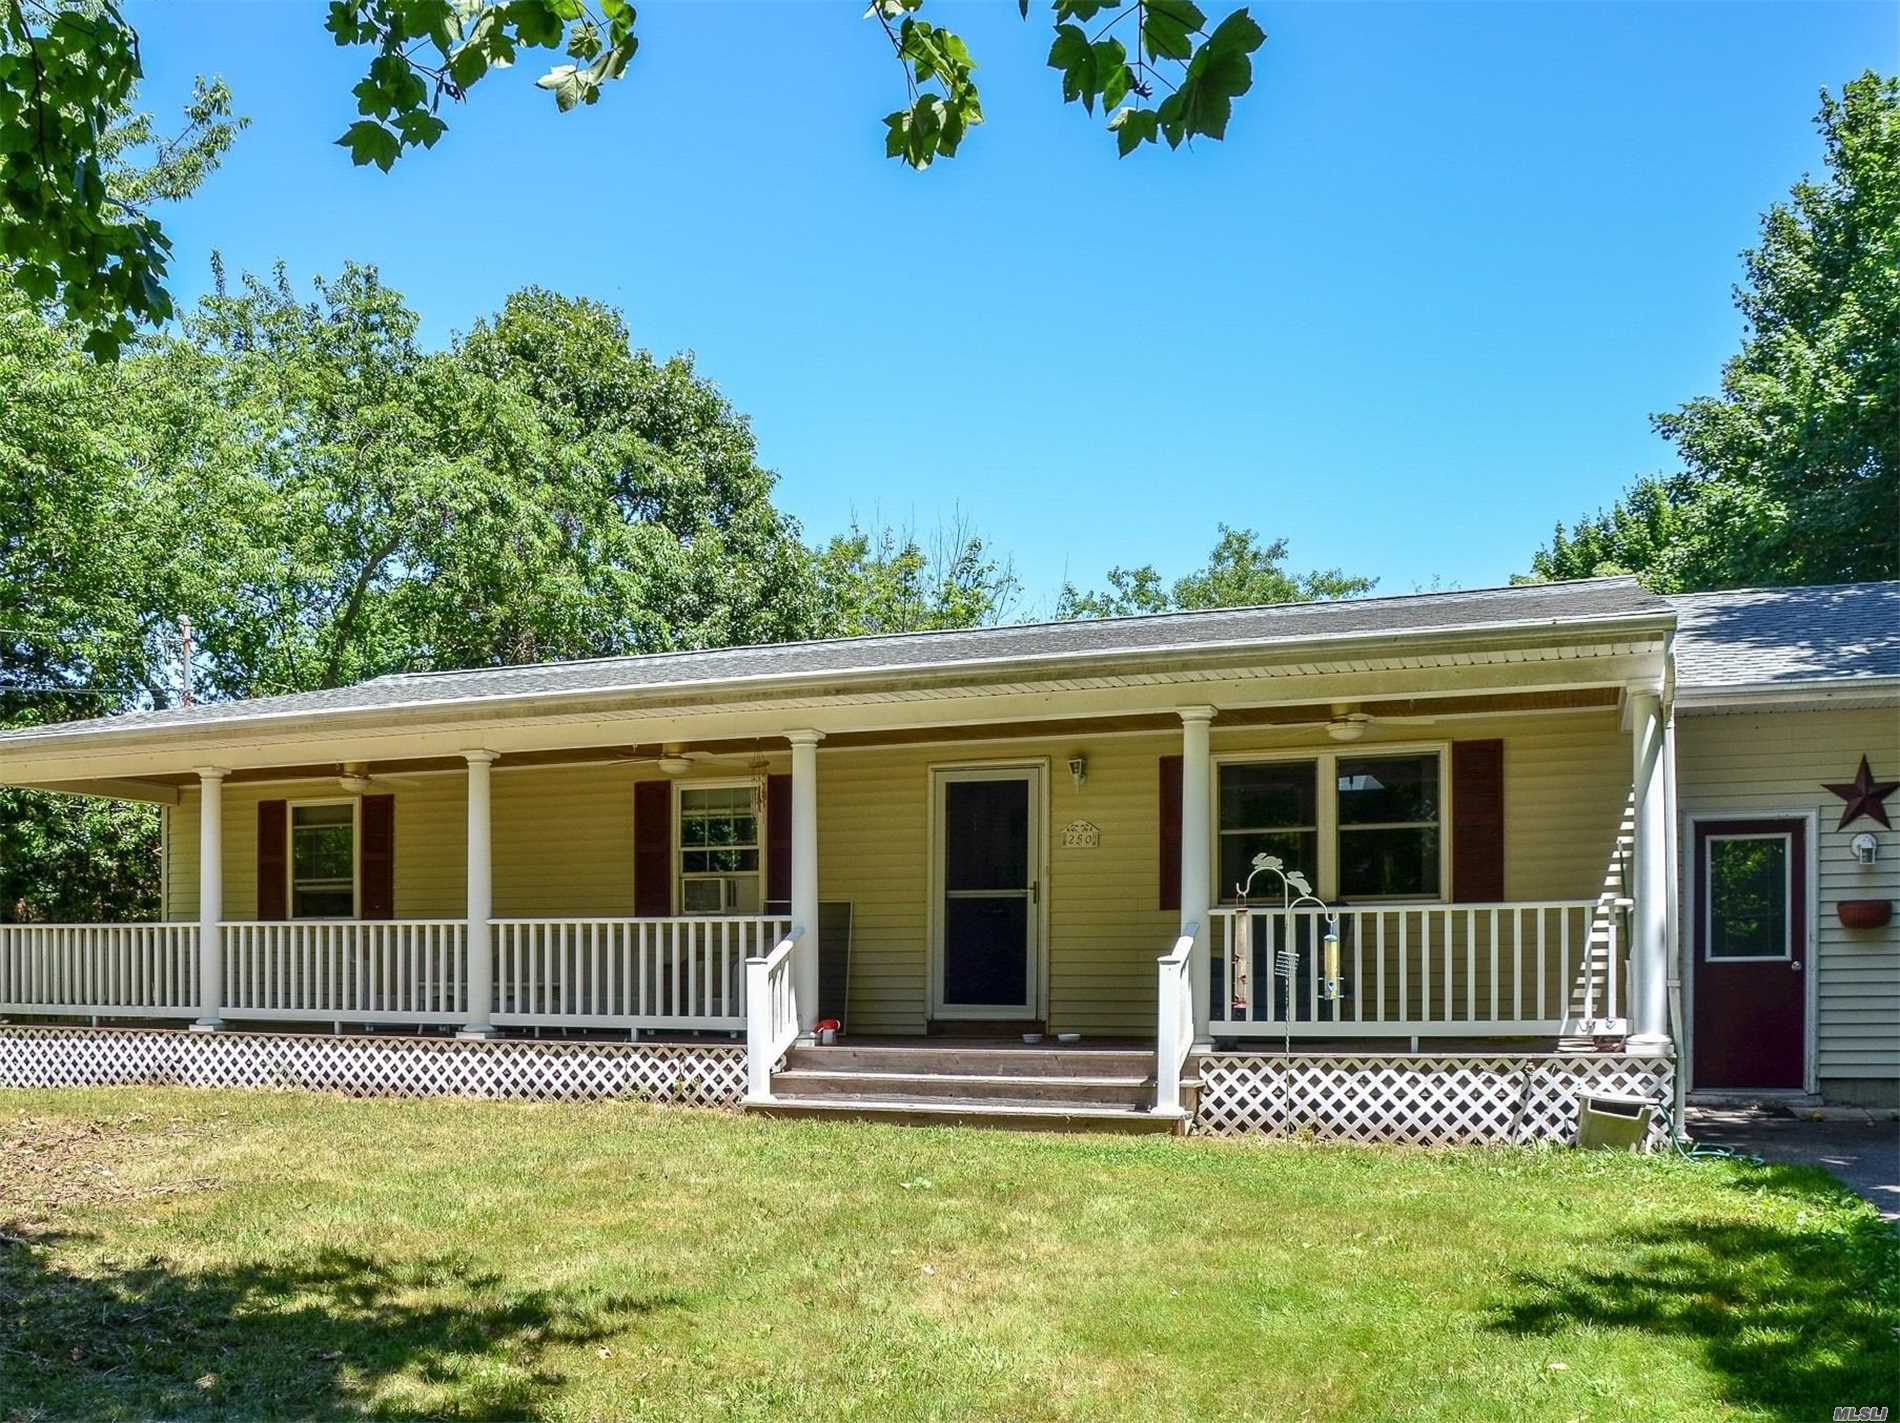 This Southold 3 Bed, 1 Bath Ranch Is Set On .87 With Large Private Yard With Room For A Pool. Large Den With Fireplace, A Country Style Kitchen And Dining Room, Explore The Possibilities. Close To Kenny&rsquo;s Beach.